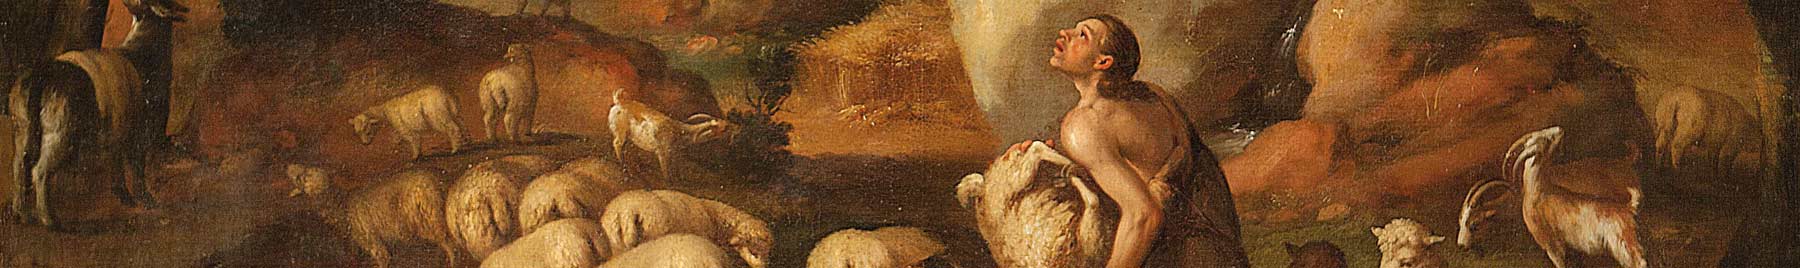 Detail from Mateo Orozco, Cain and Abel, oil painting, 1652